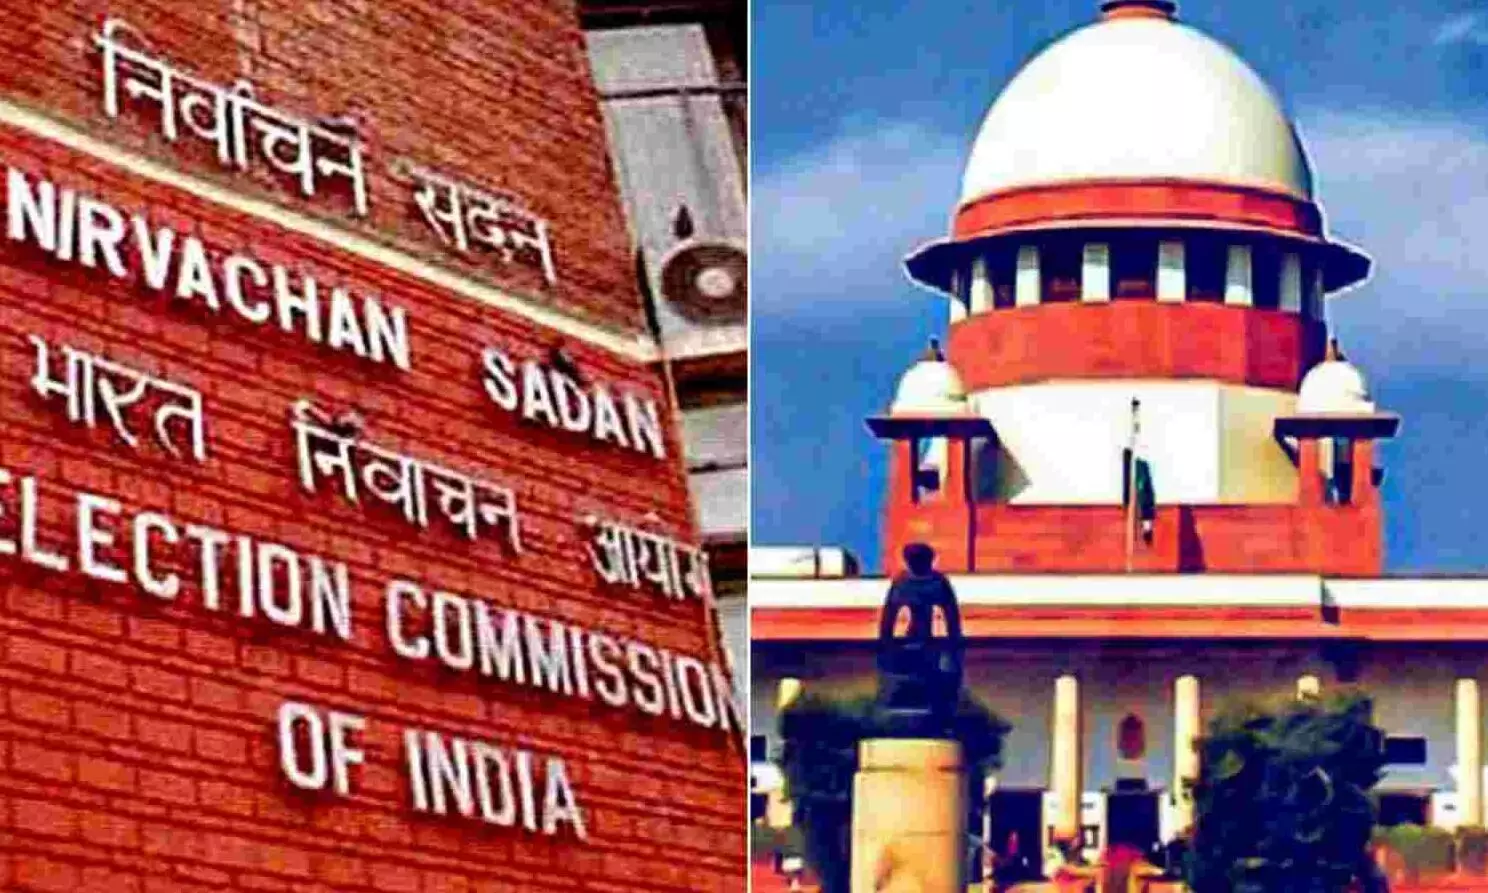 Economy is losing money due to freebies: SC asks EC to join panel to tackle it, EC says it cant